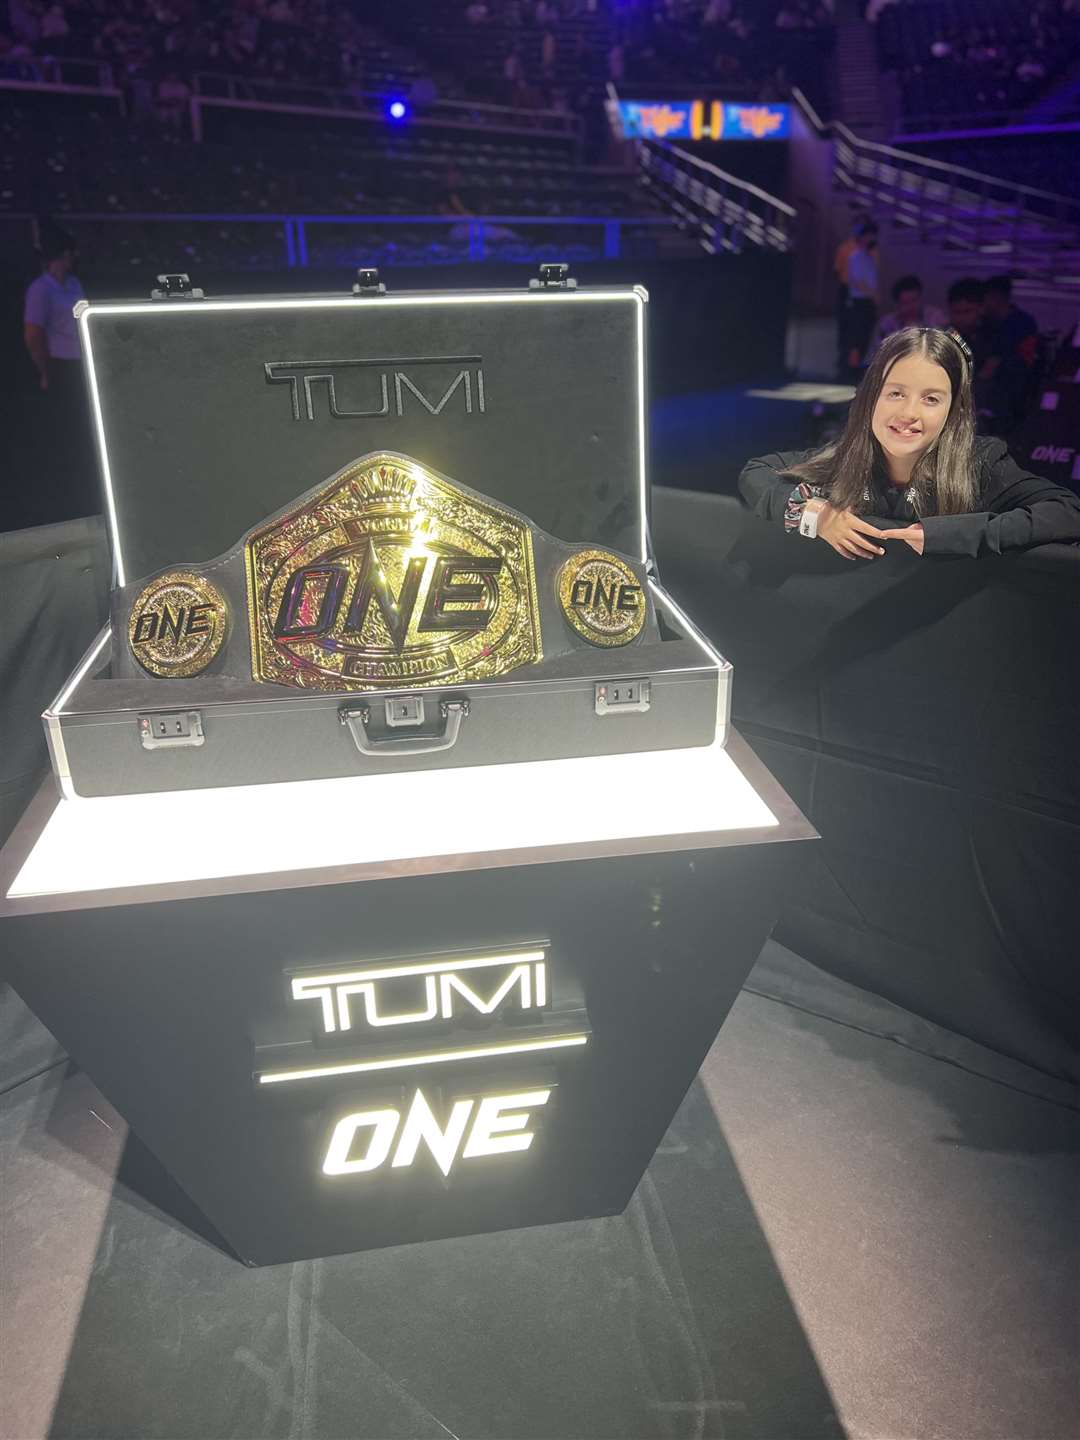 Could a ONE Championship be in Niamh Ross' future one day?